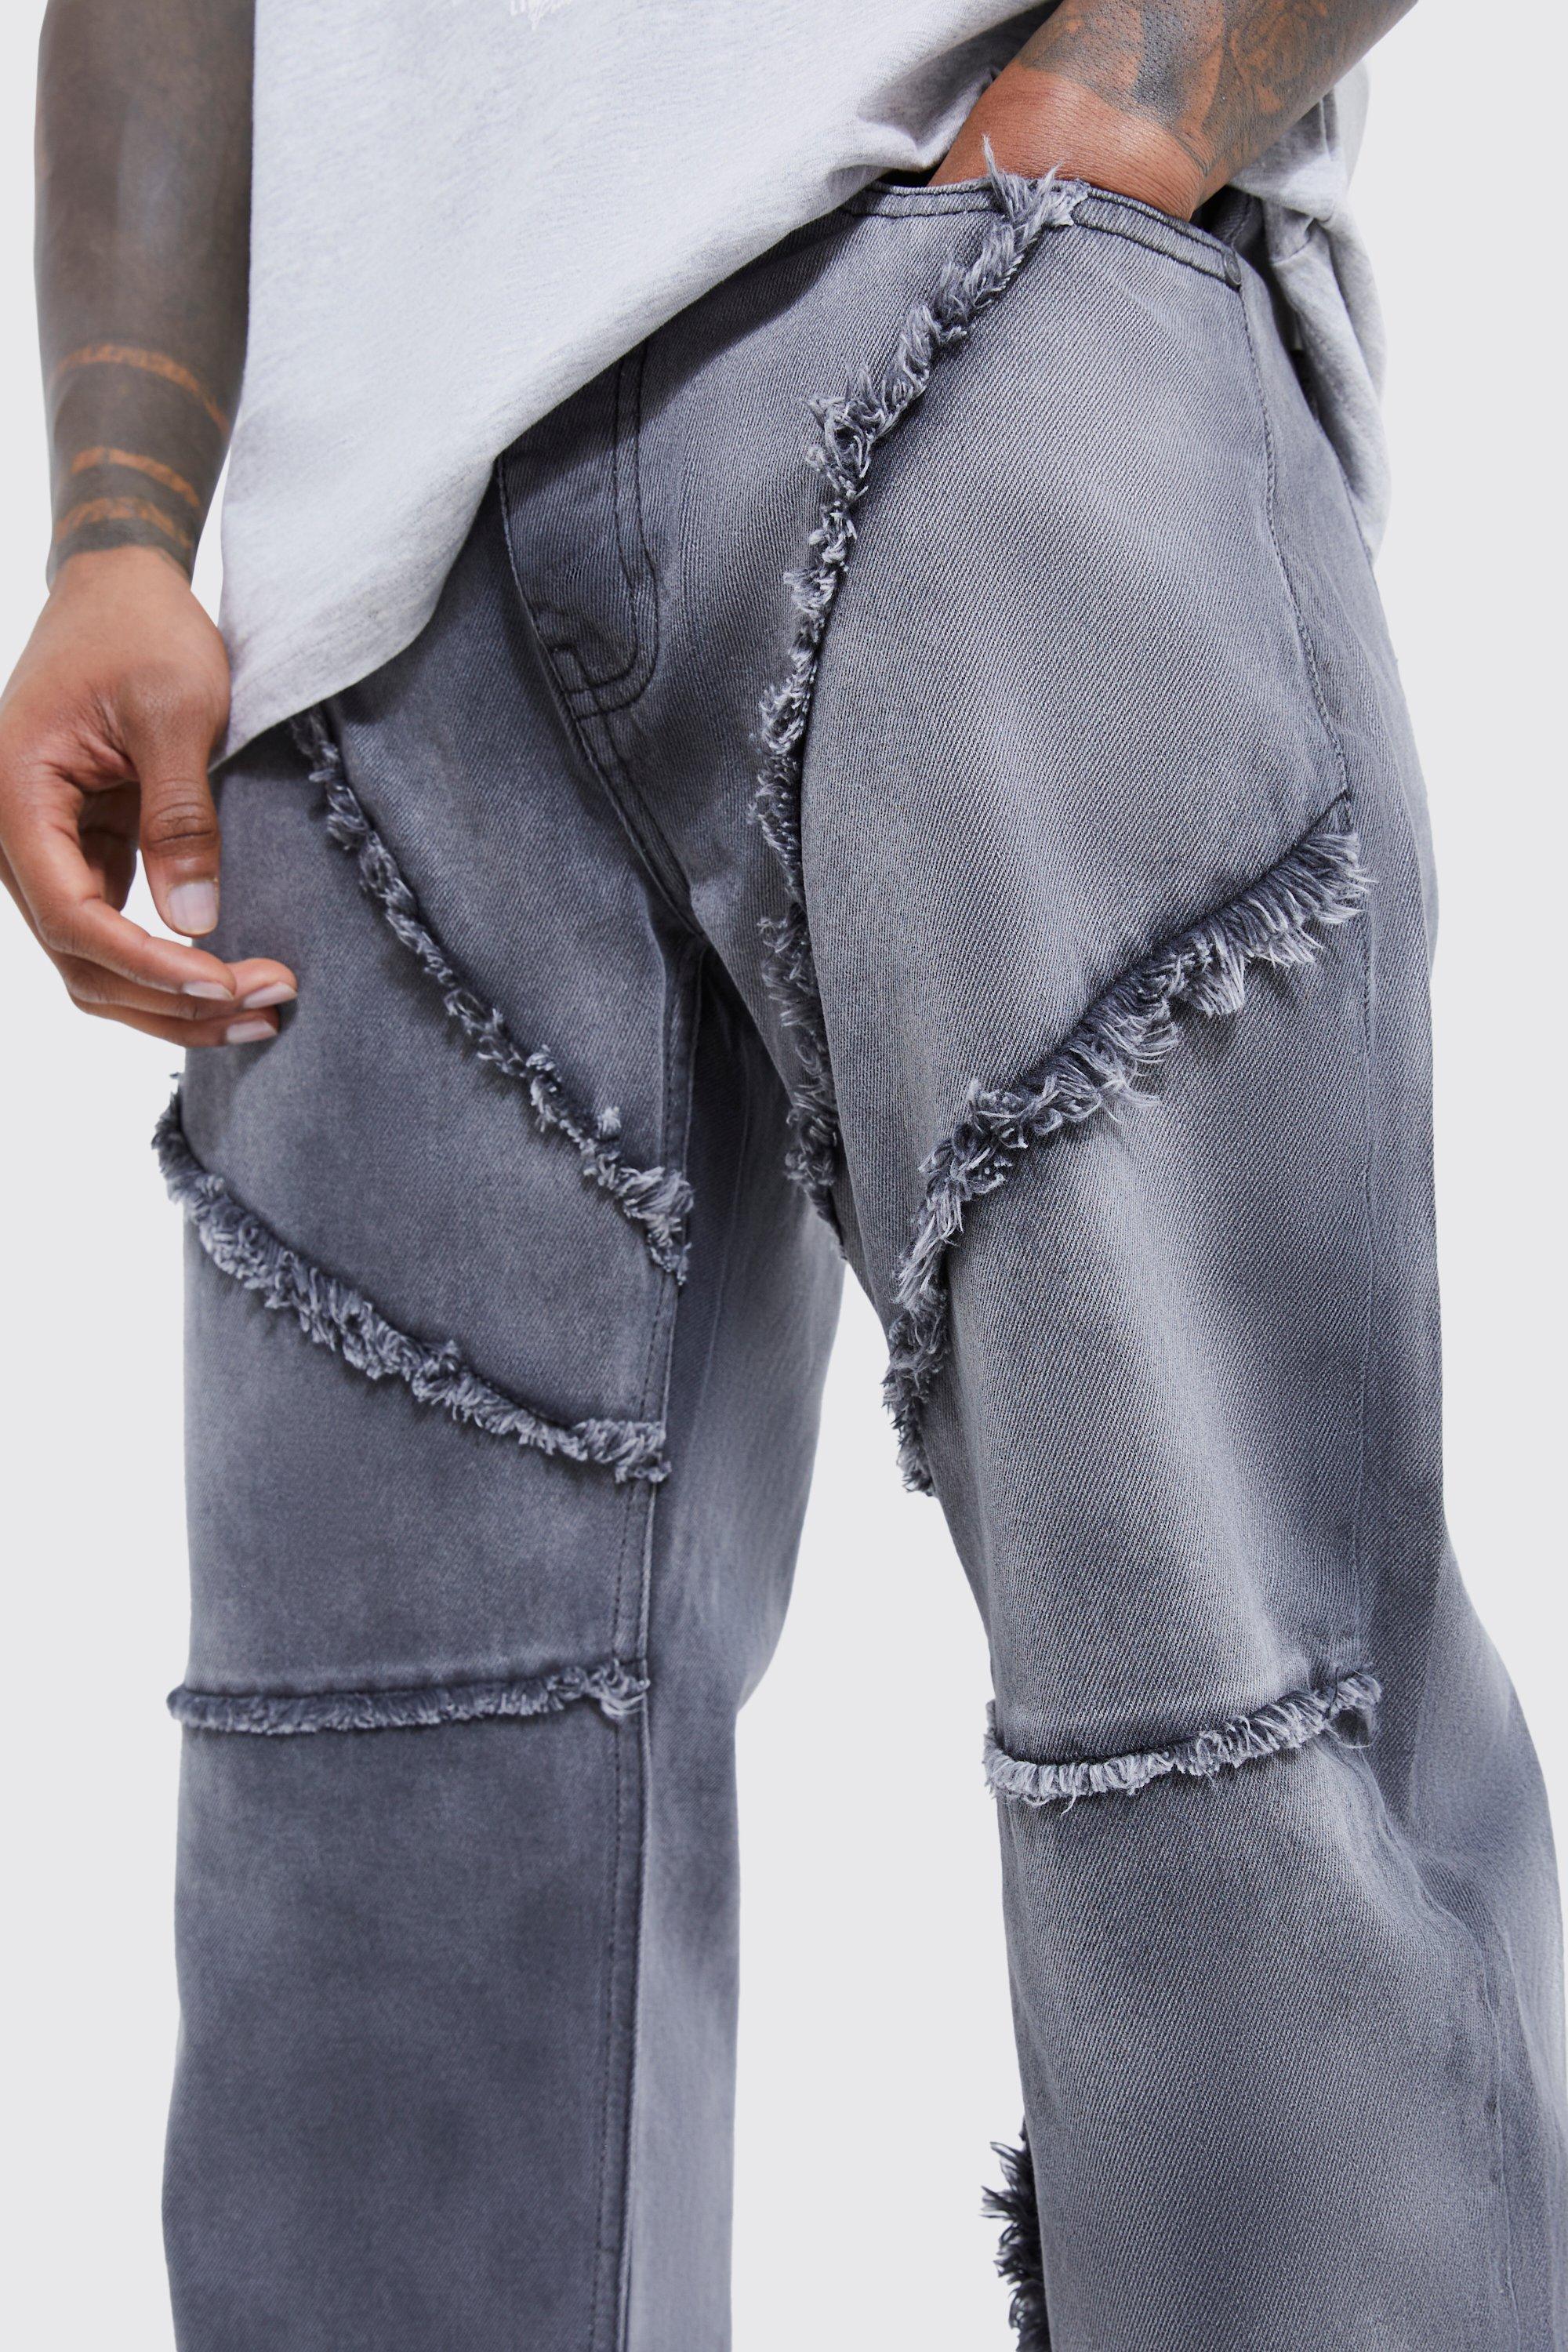 Relaxed Rigid Flare Frayed Edge Jeans